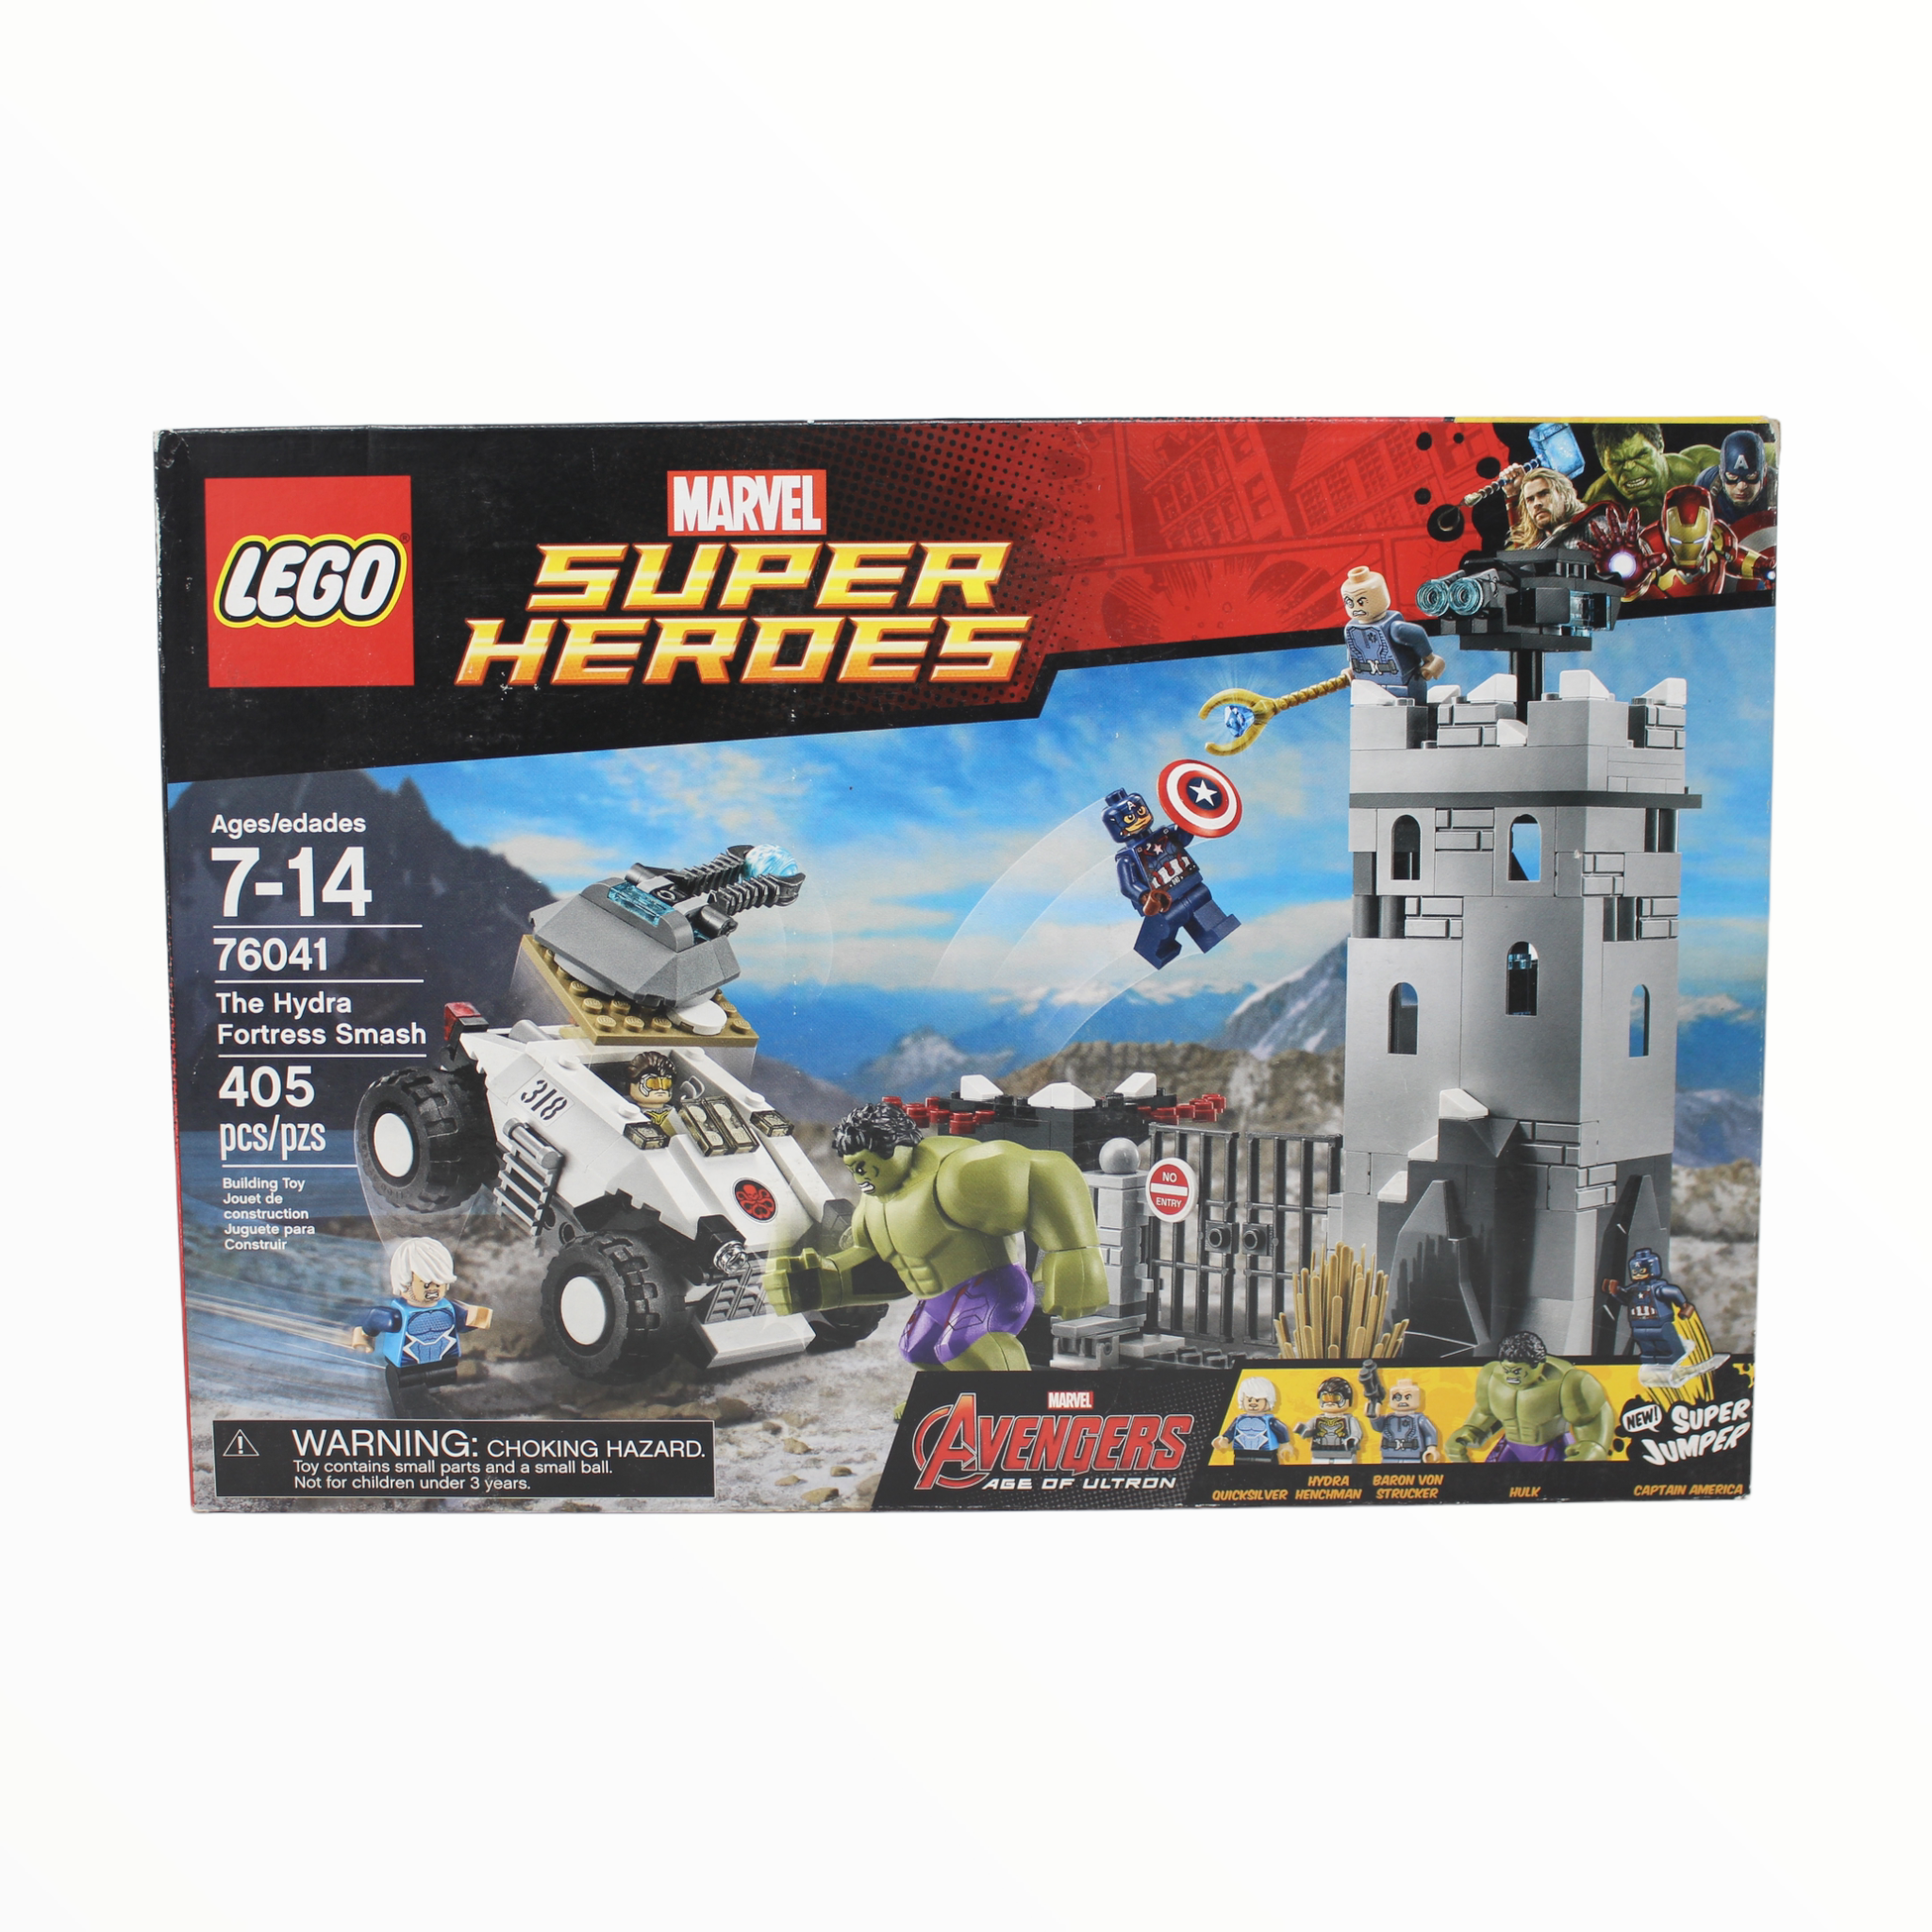 Retired Set 76041 Marvel Super Heroes The Hydra Fortress Smash